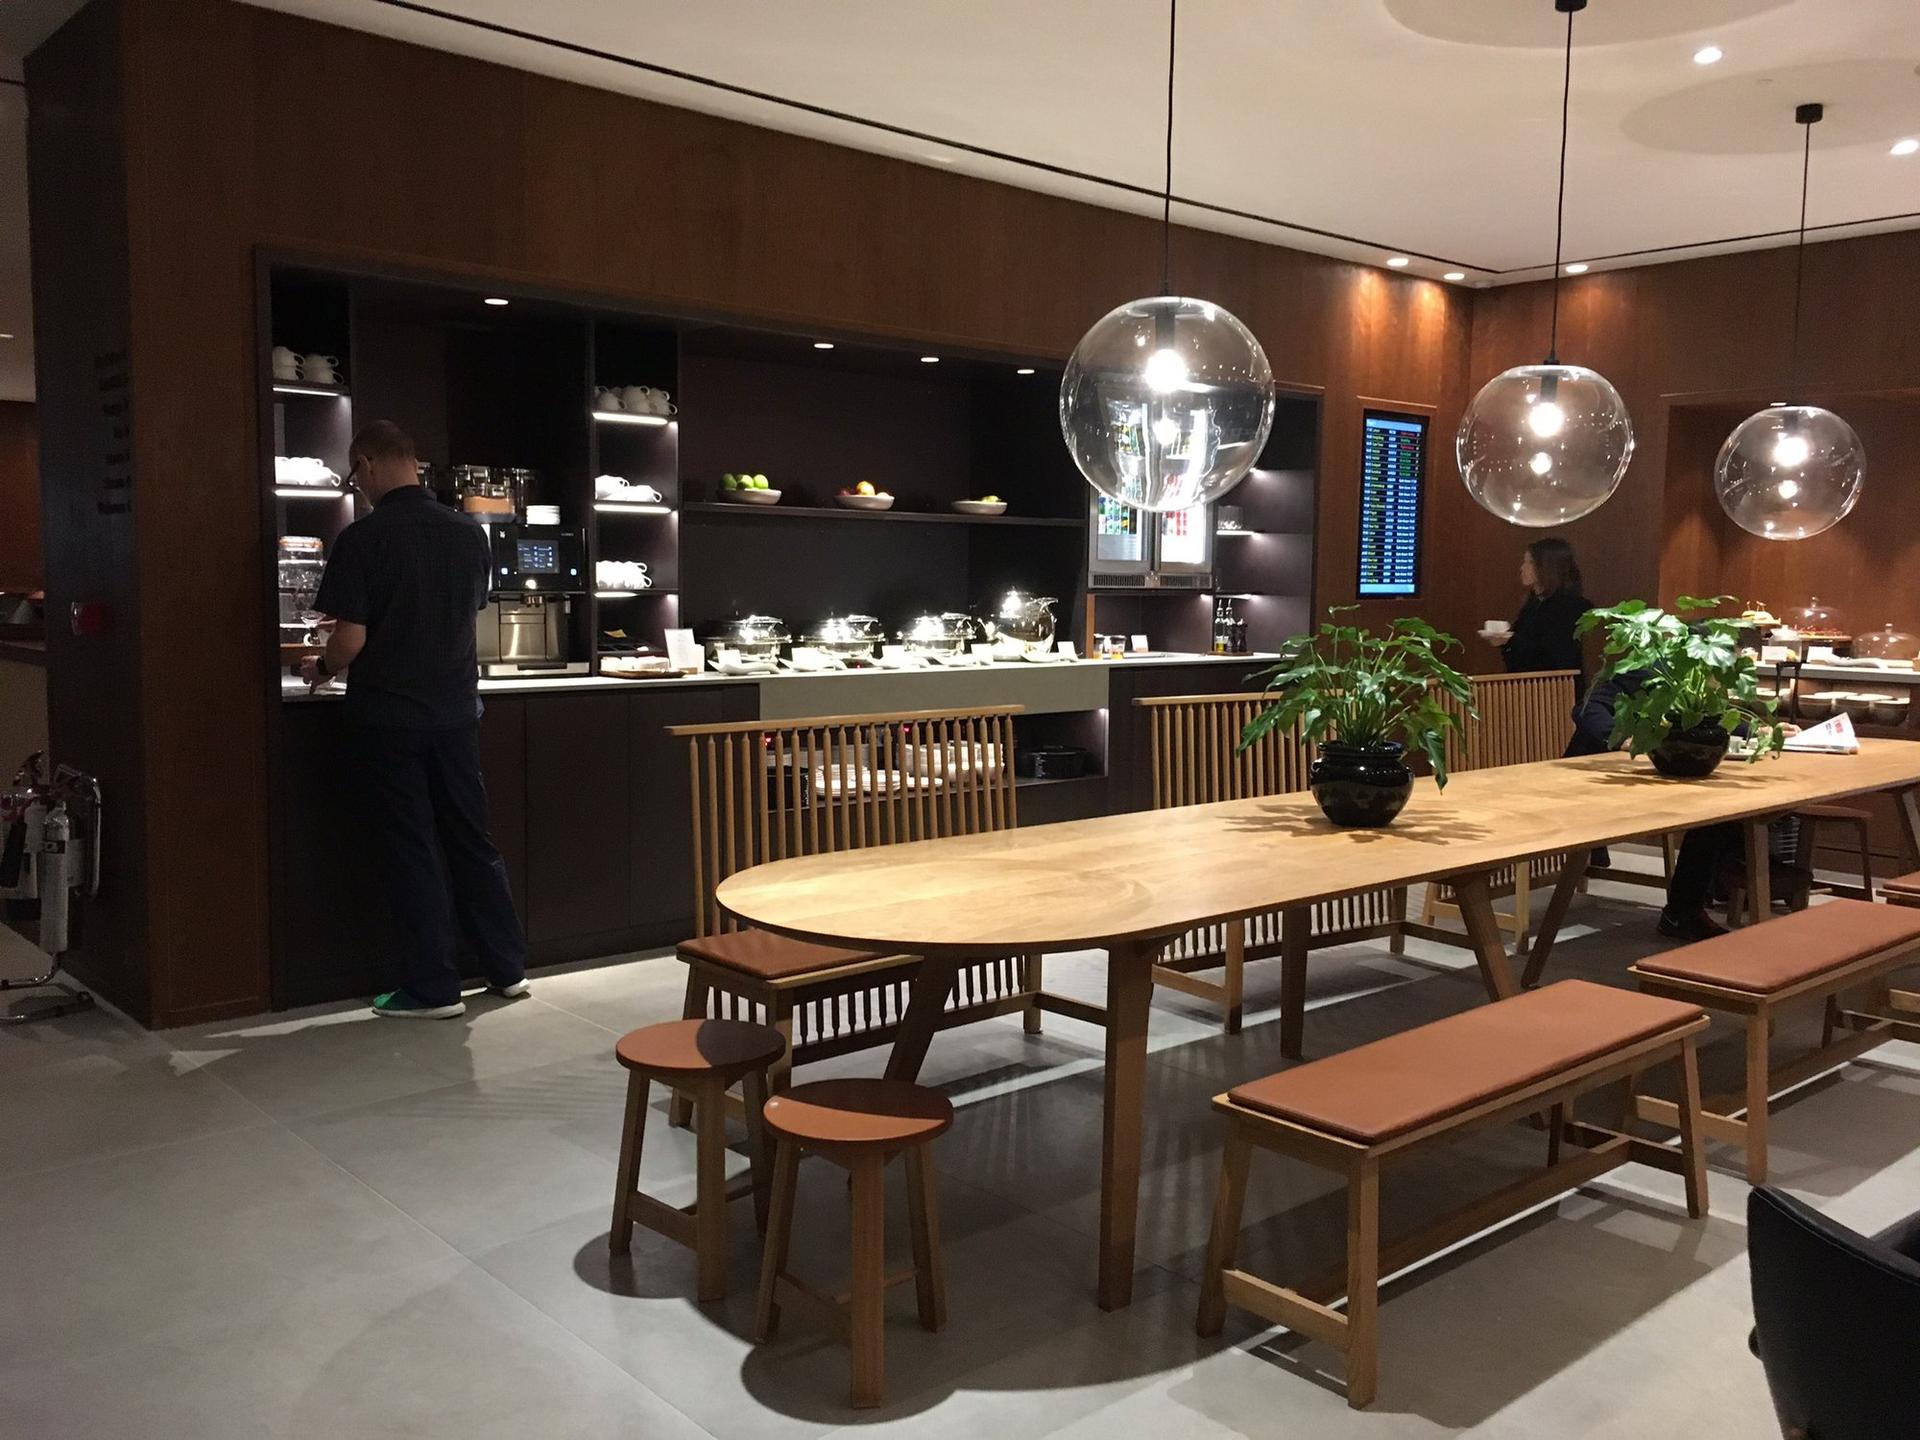 Cathay Pacific Business Class Lounge image 7 of 48